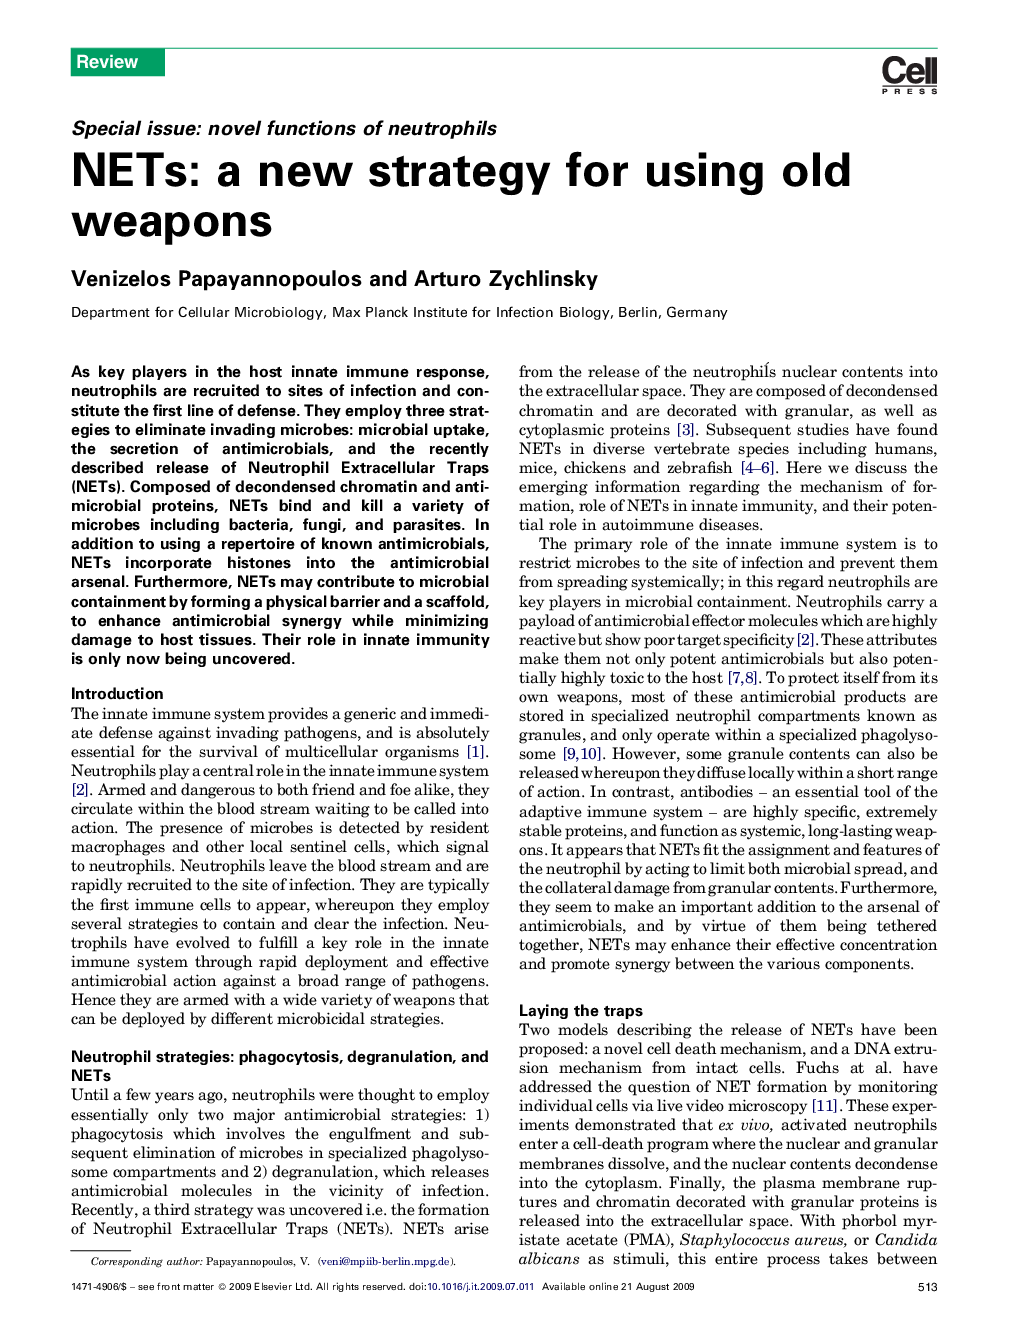 NETs: a new strategy for using old weapons